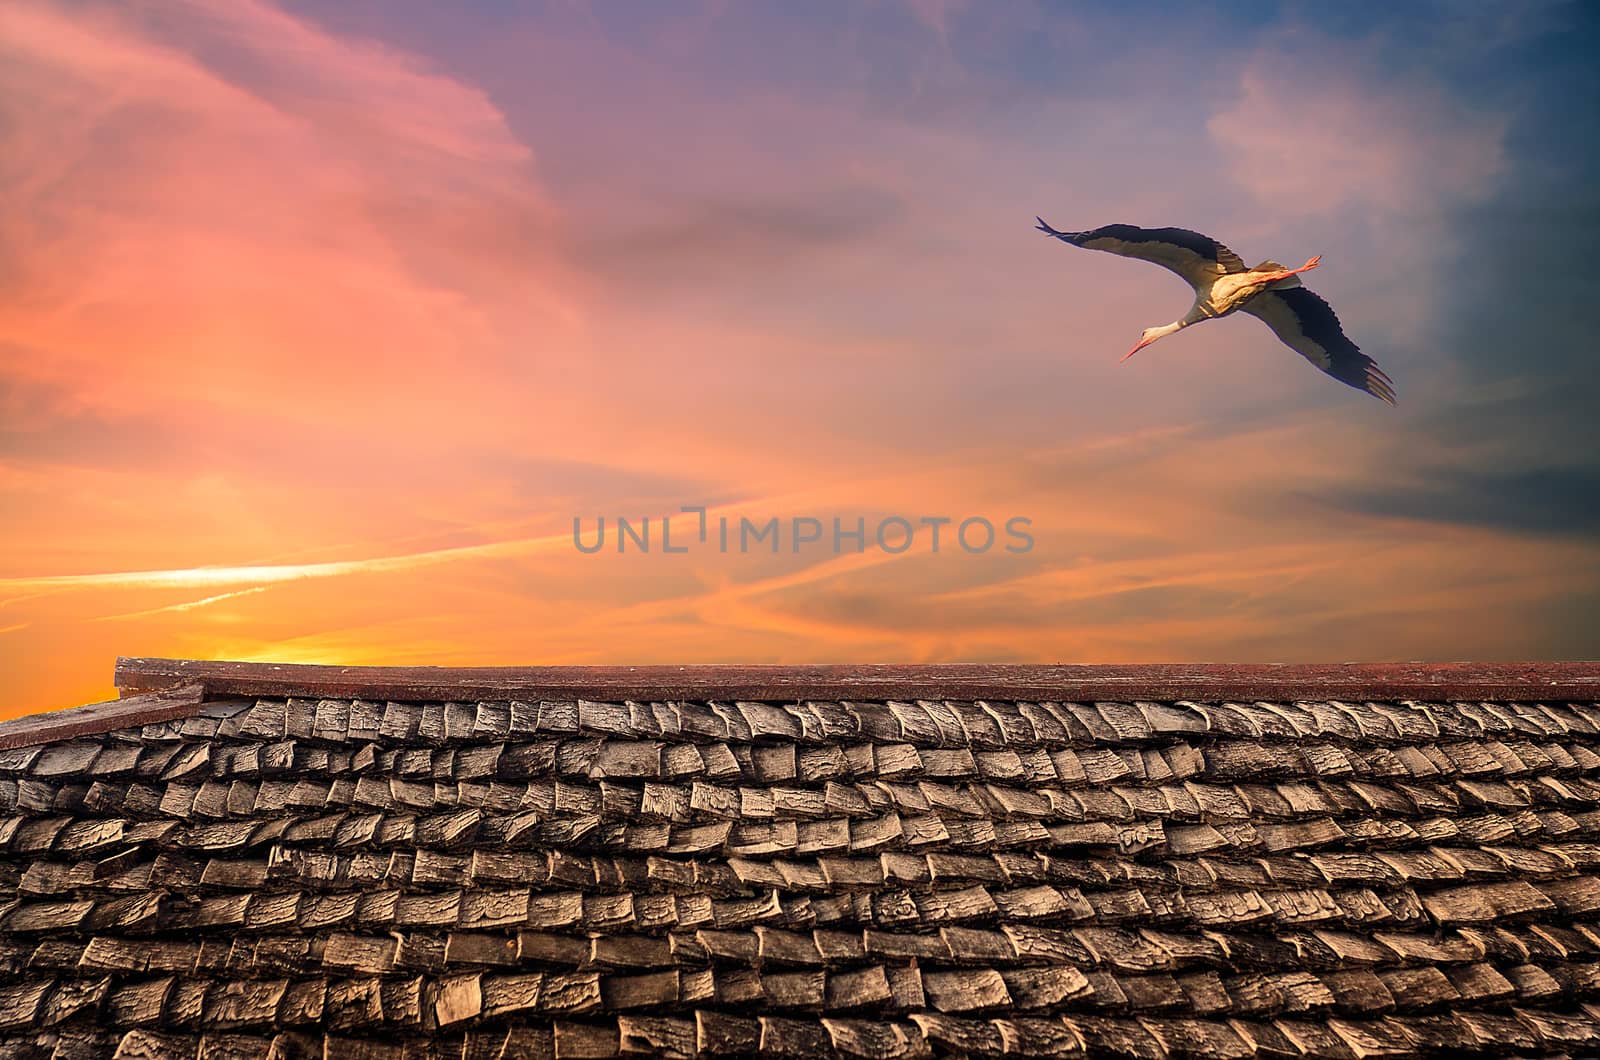 White stork with wings raised fly over a roof. Sunset scene with lonely egret bird with copy space